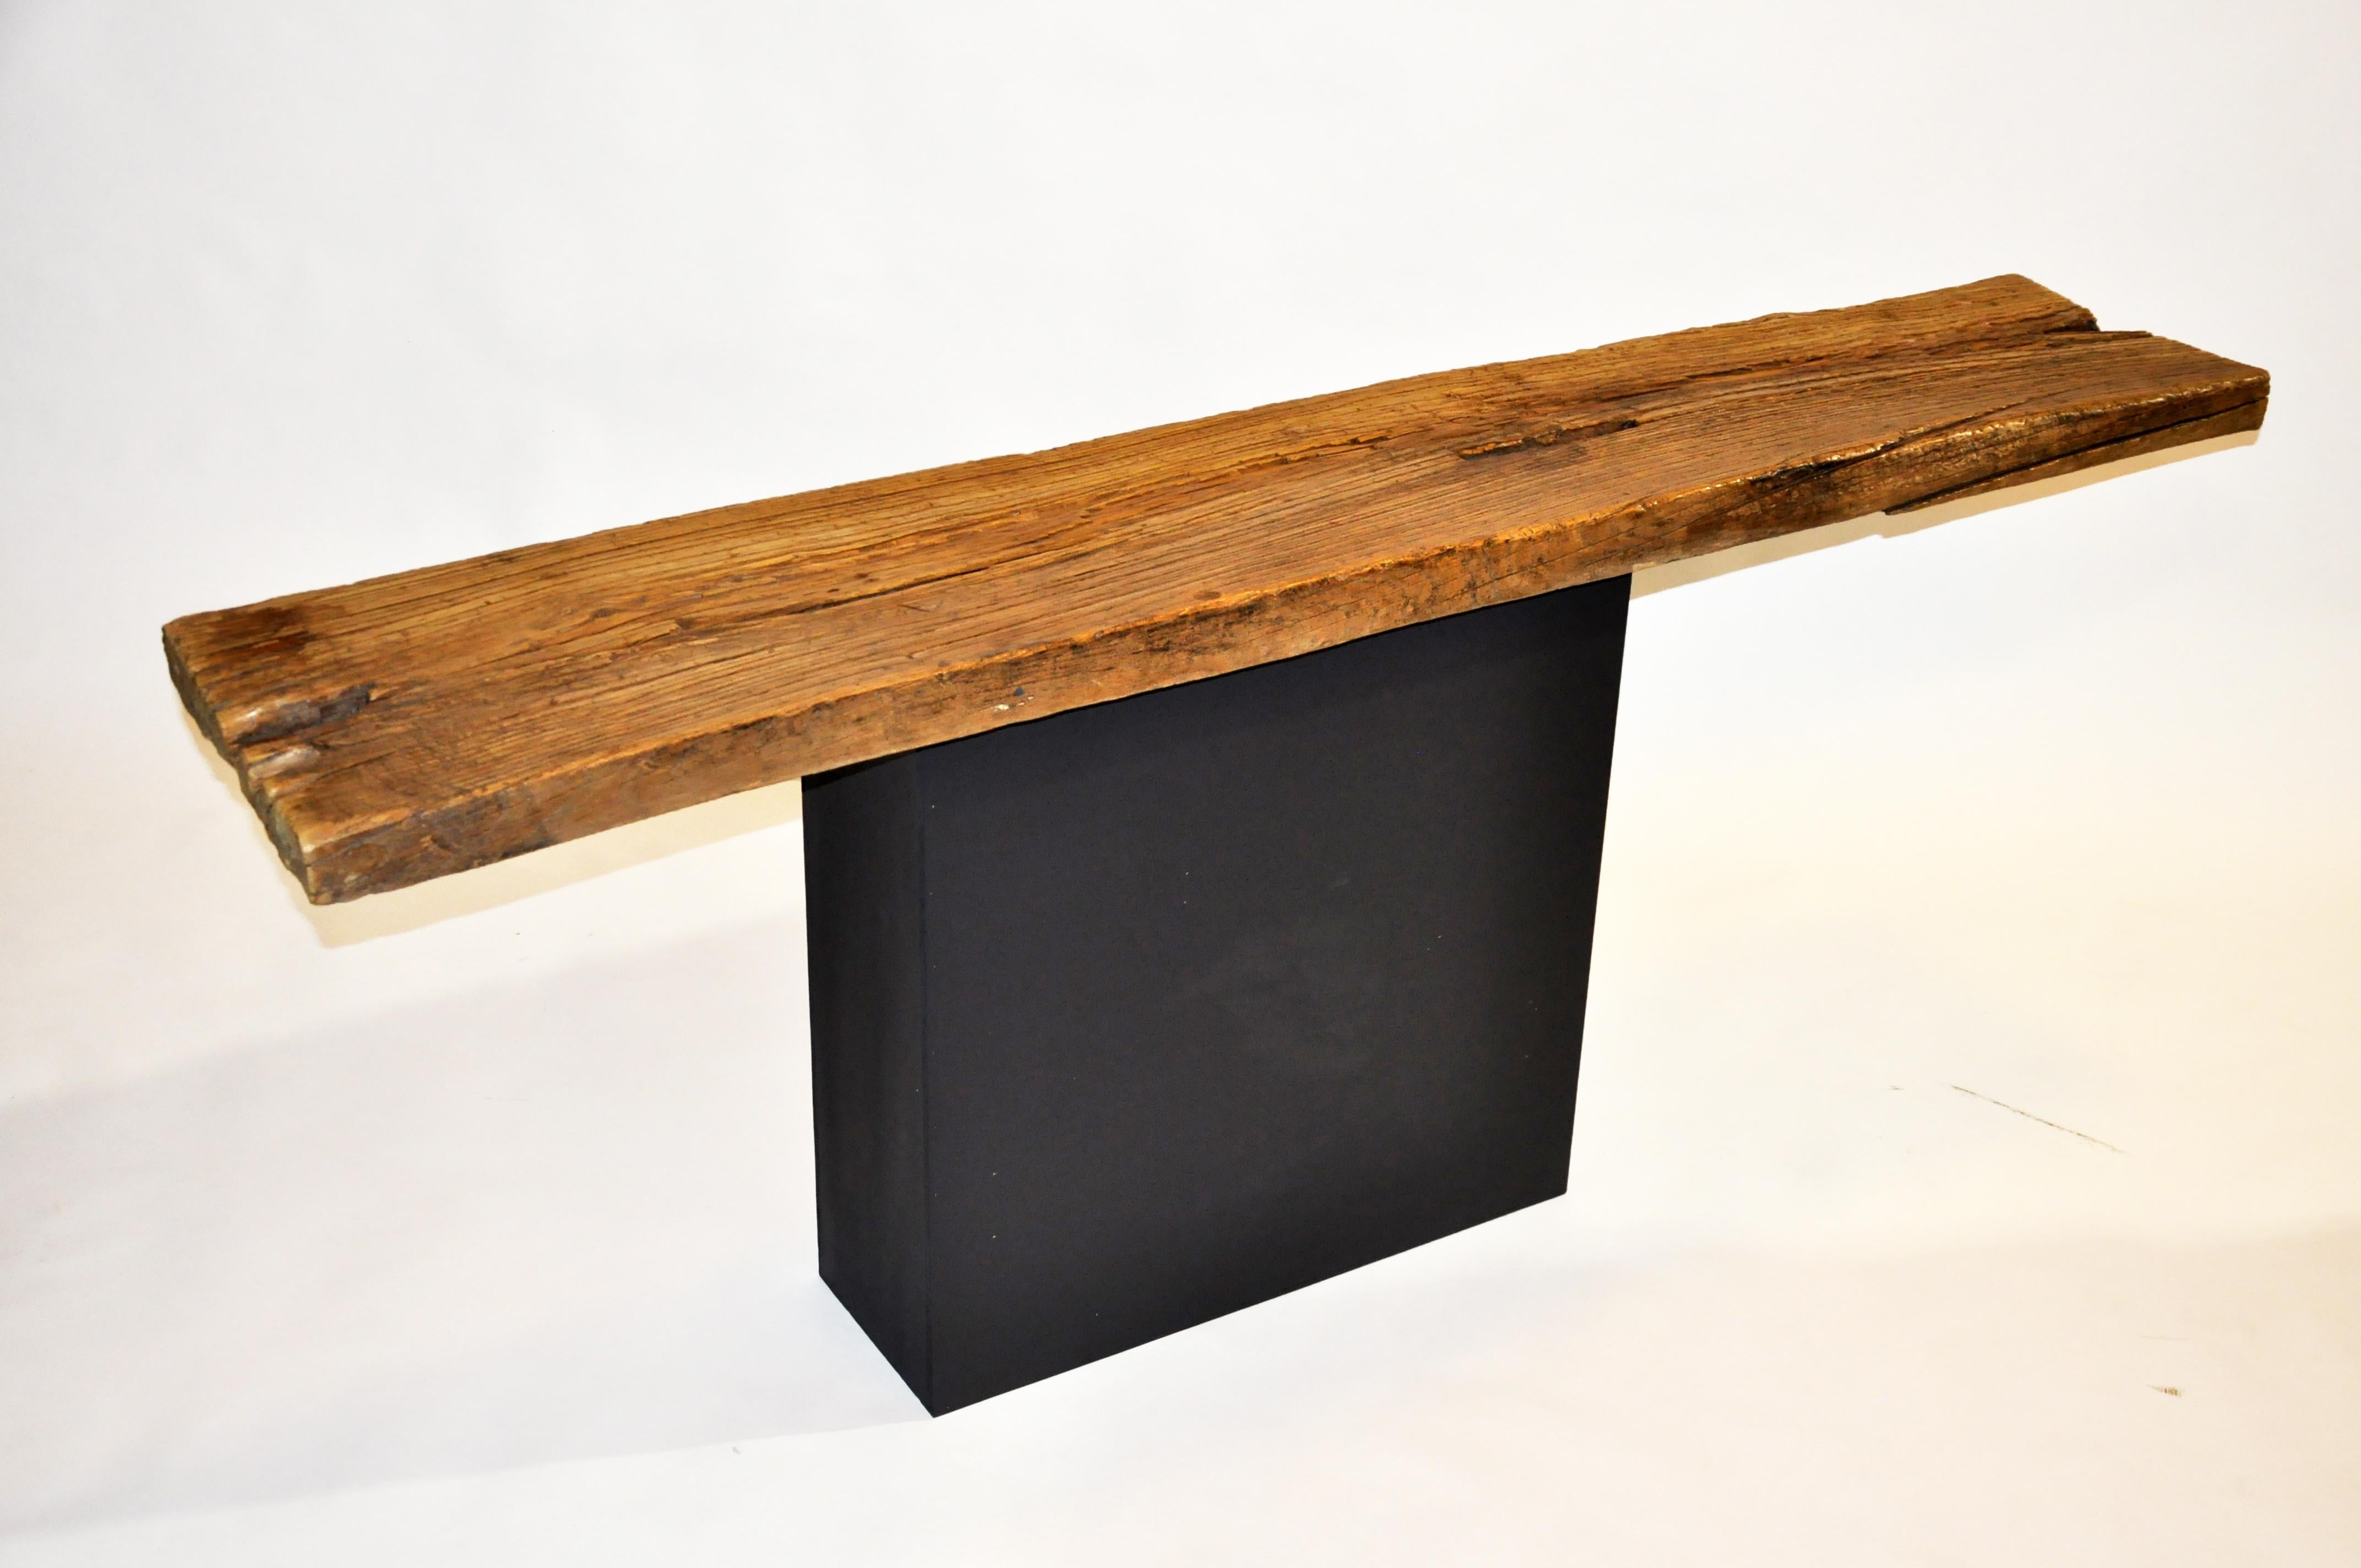 This altar table was made from reclaimed elm wood, MDF, and black paint circa 2021 in Chicago. The tabletop is a reclaimed elmwood piece that has been repurposed as an altar table. Wear is consistent with age and use. The tabletop is from one piece